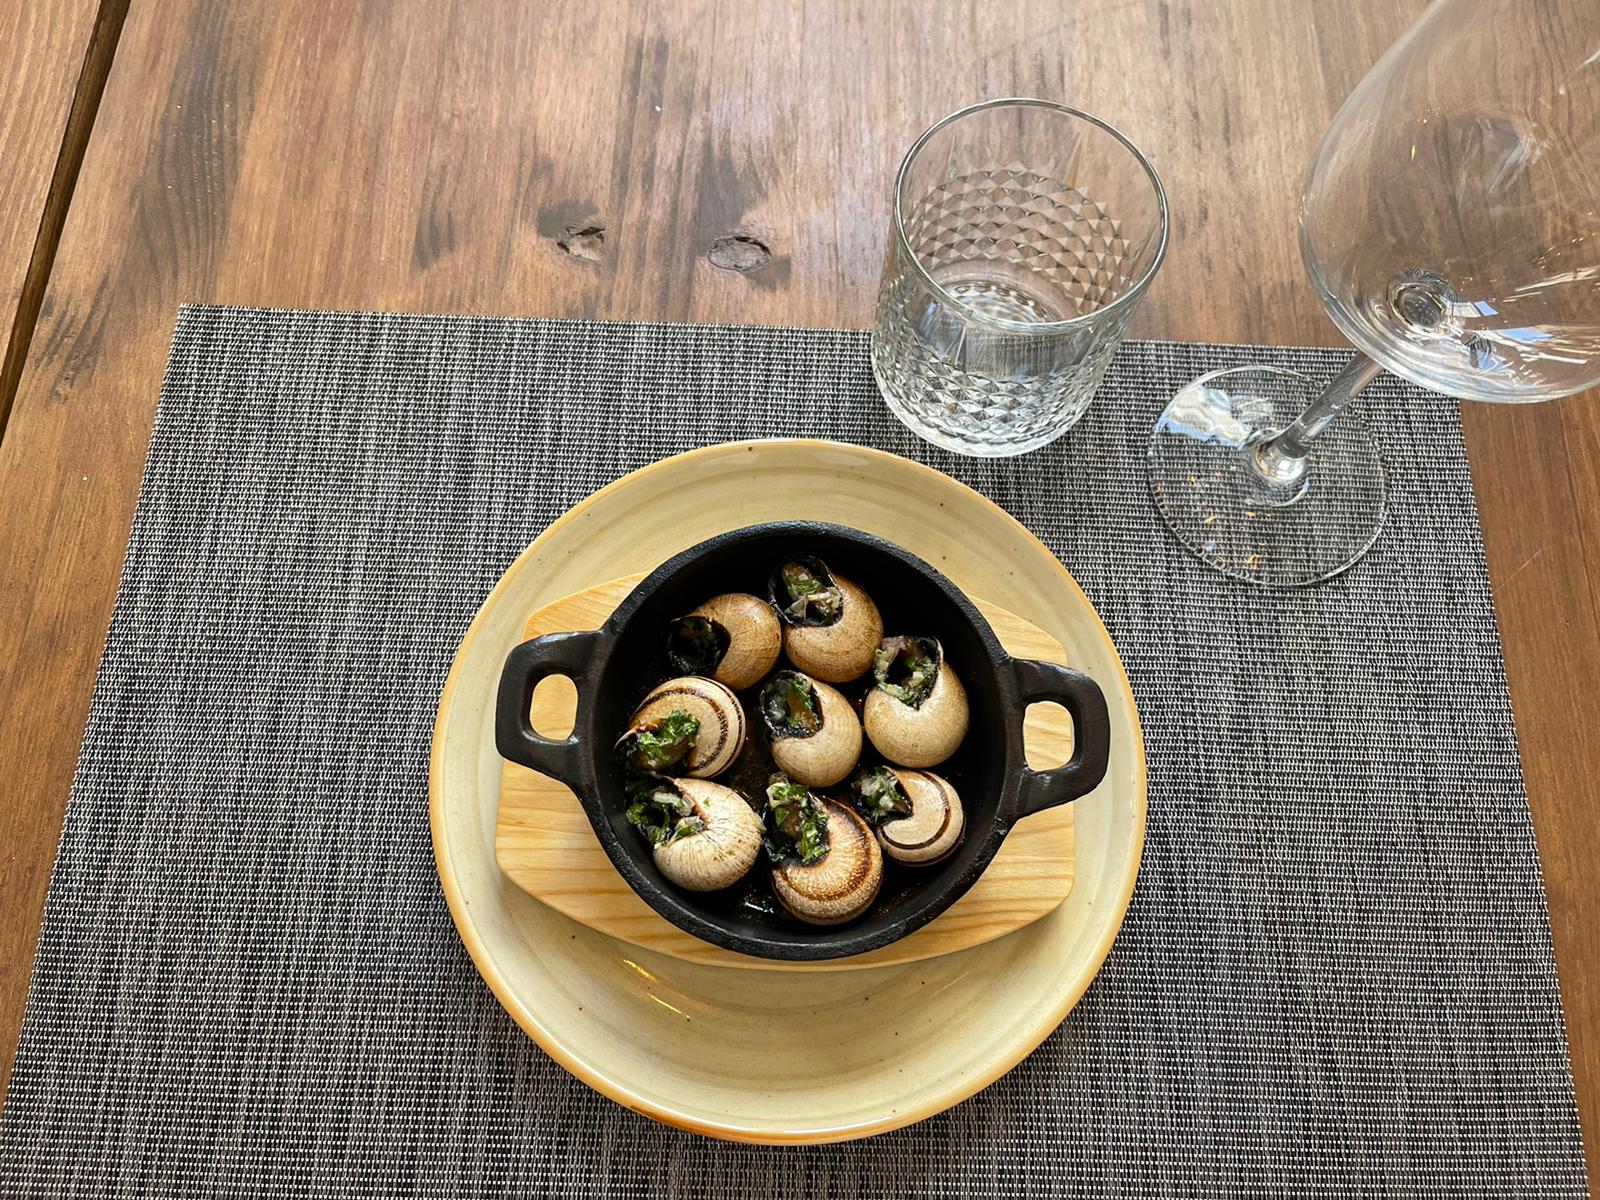 Snails with Garlic Butter and Parsley